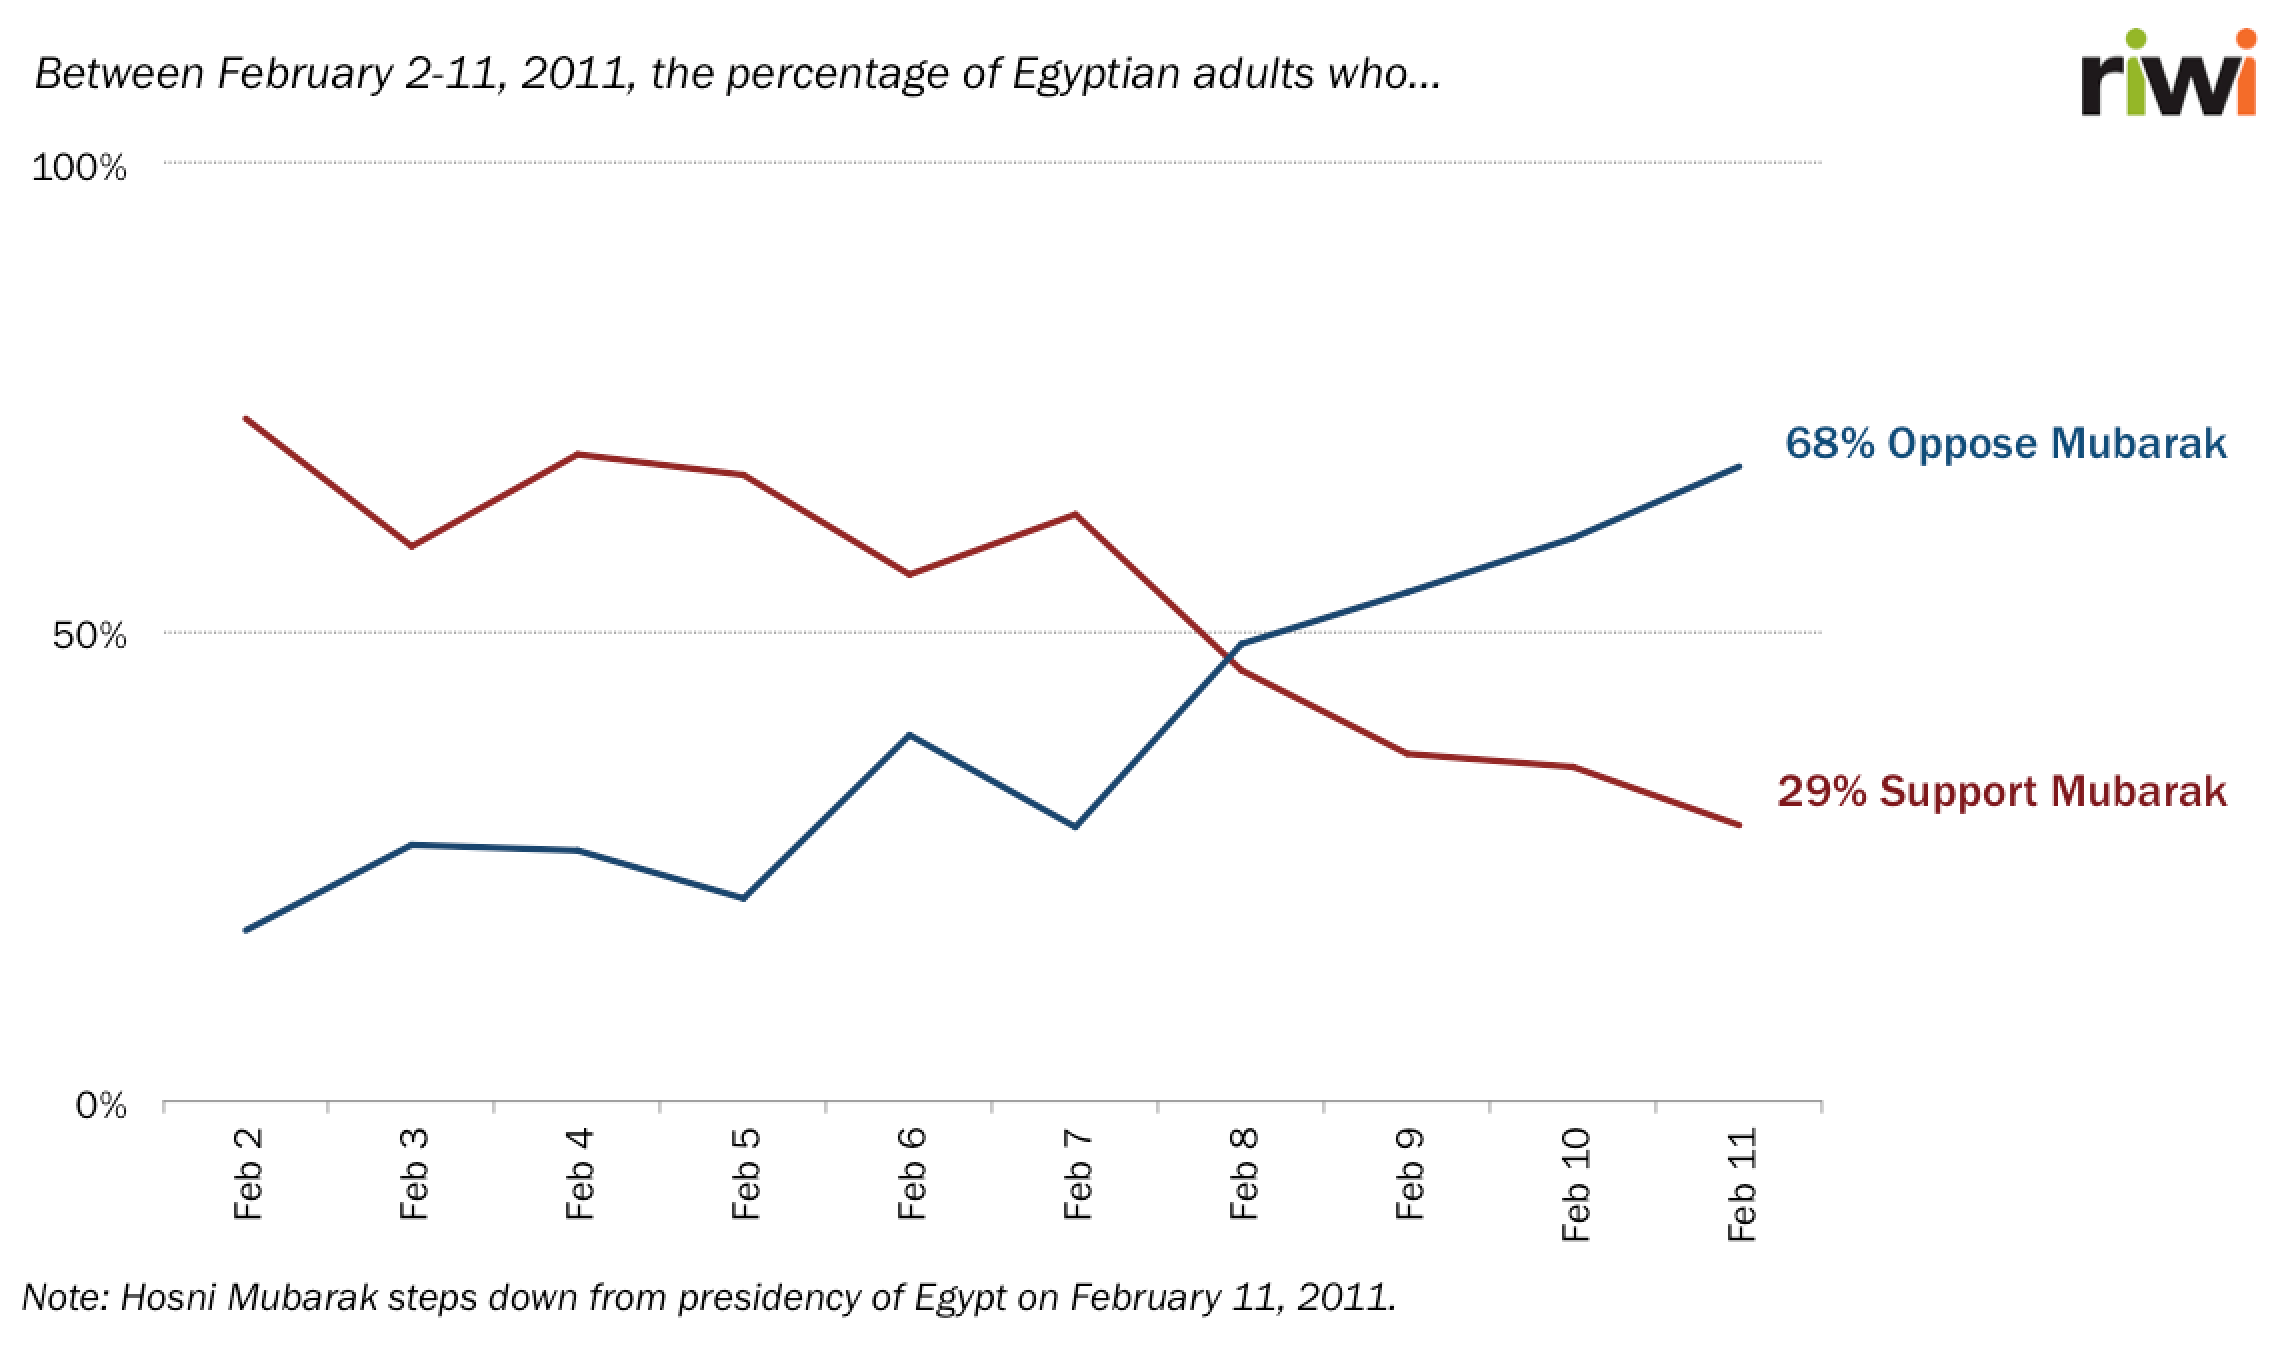 Percentage of Egyptian adults who support/oppose Mubarak